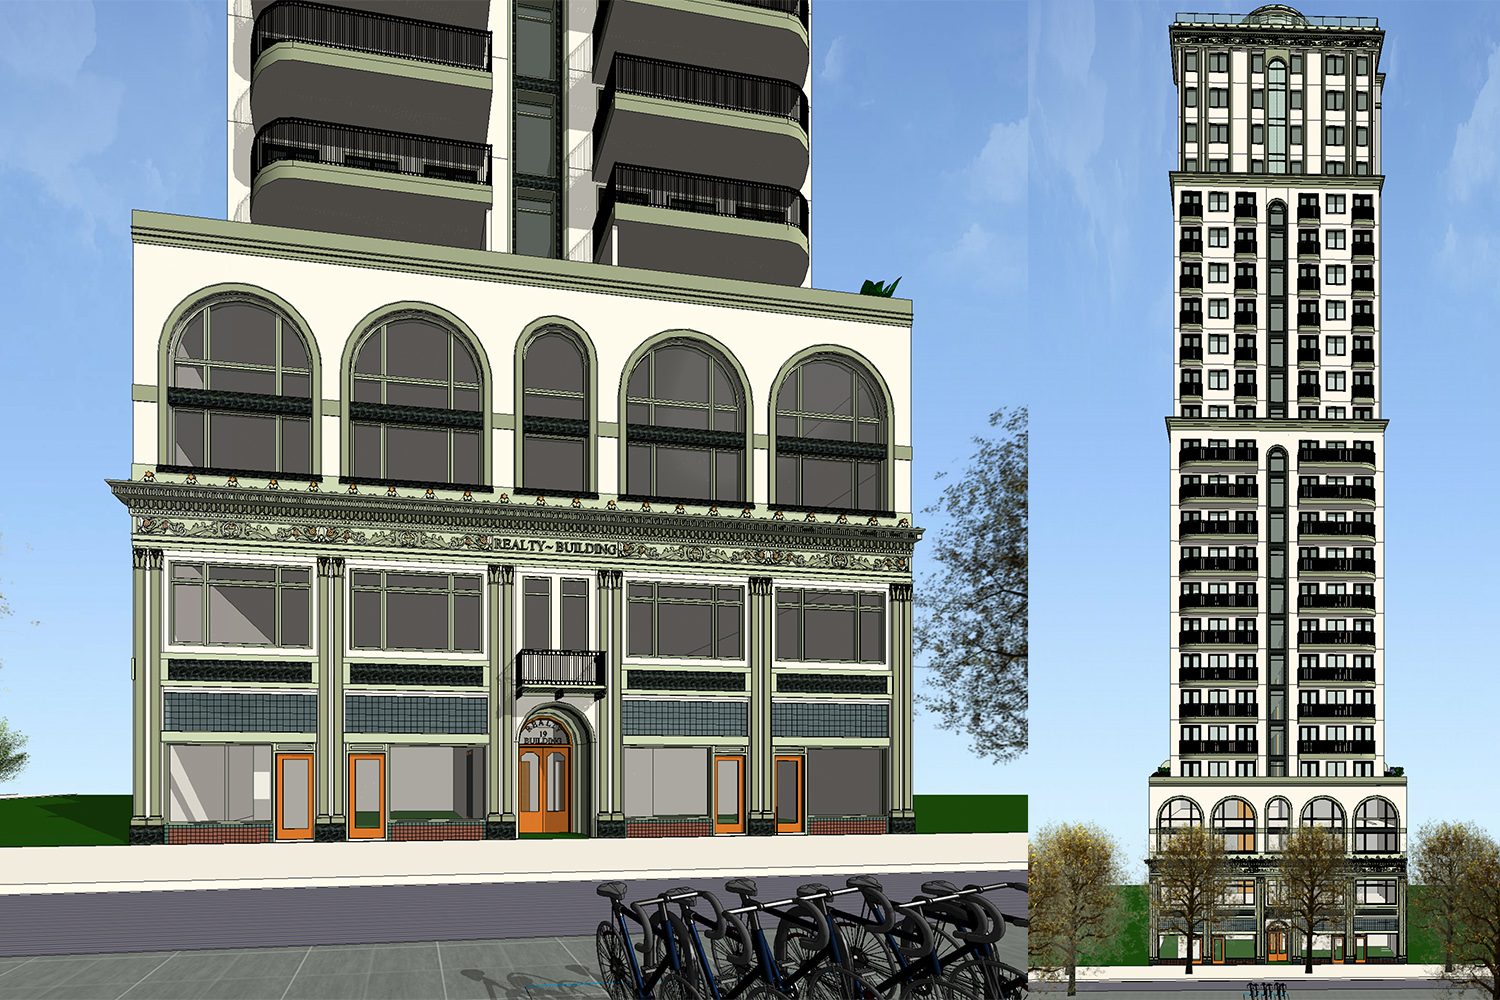 19 North 2nd Street podium on left, tower to the right, image courtesy Anderson Architects